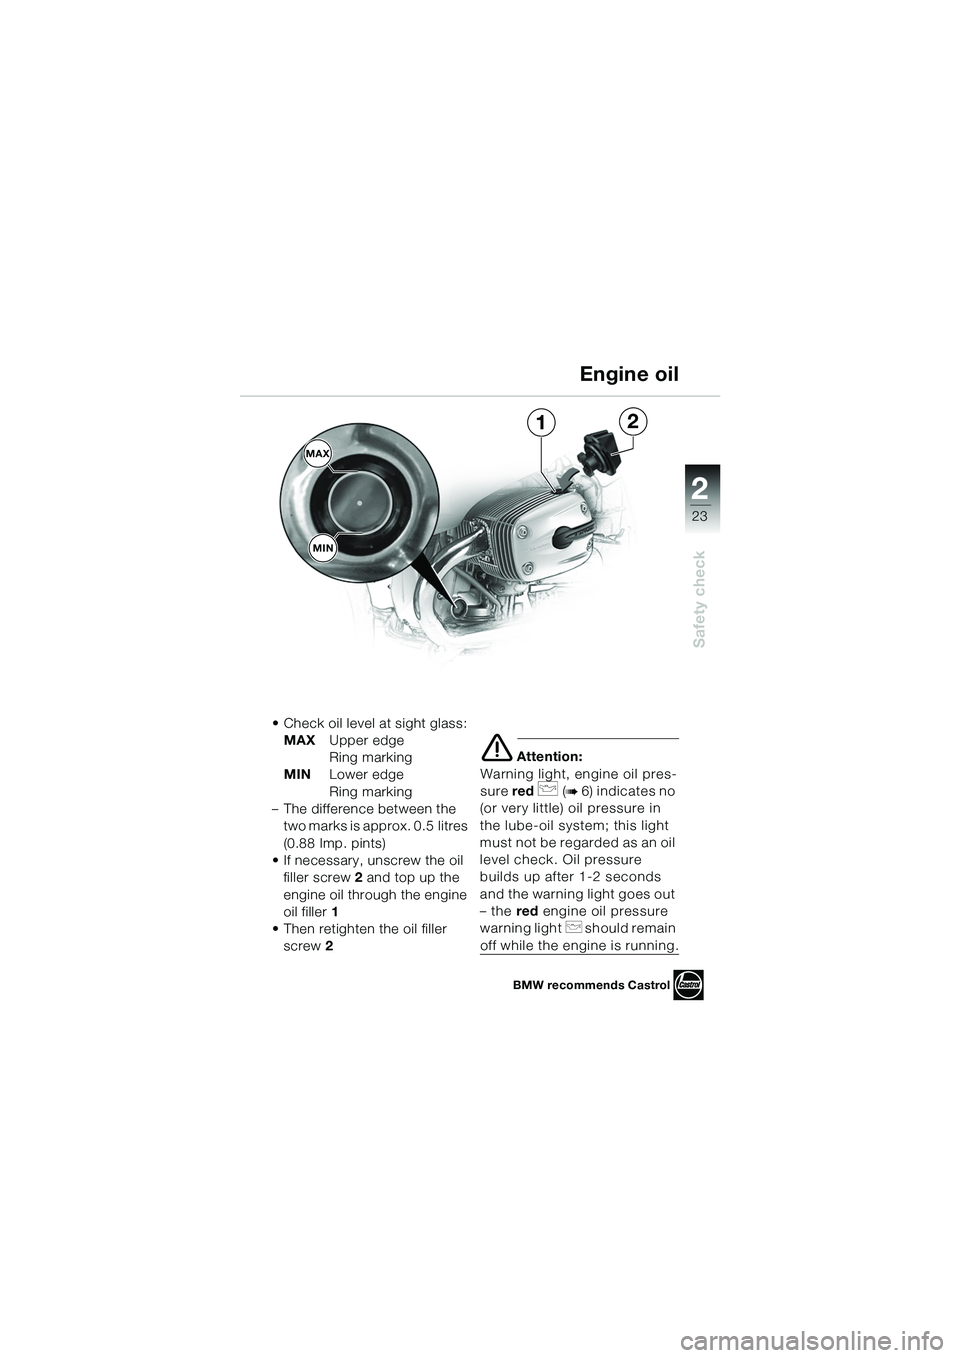 BMW MOTORRAD R 1100 S 2002  Riders Manual (in English) 2
23
Safety check
1
MAX
2
MIN
• Check oil level at sight glass:MAX Upper edge 
Ring marking
MIN Lower edge 
Ring marking
– The difference between the  two marks is approx. 0.5 litres 
(0.88 Imp. p